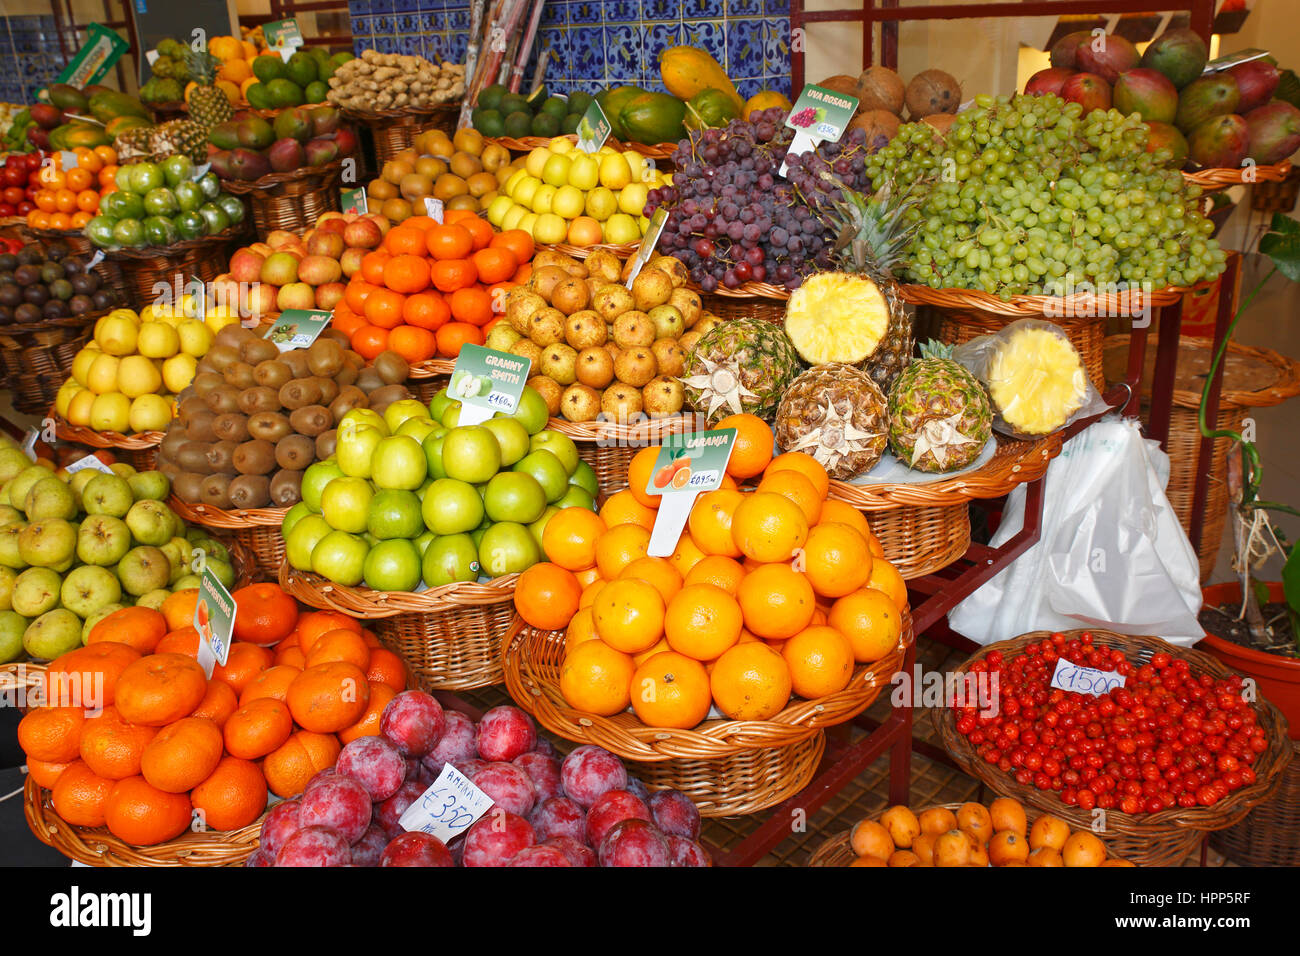 Fruit stall with various fruits, Market Hall, Funchal, Madeira, Portugal Stock Photo